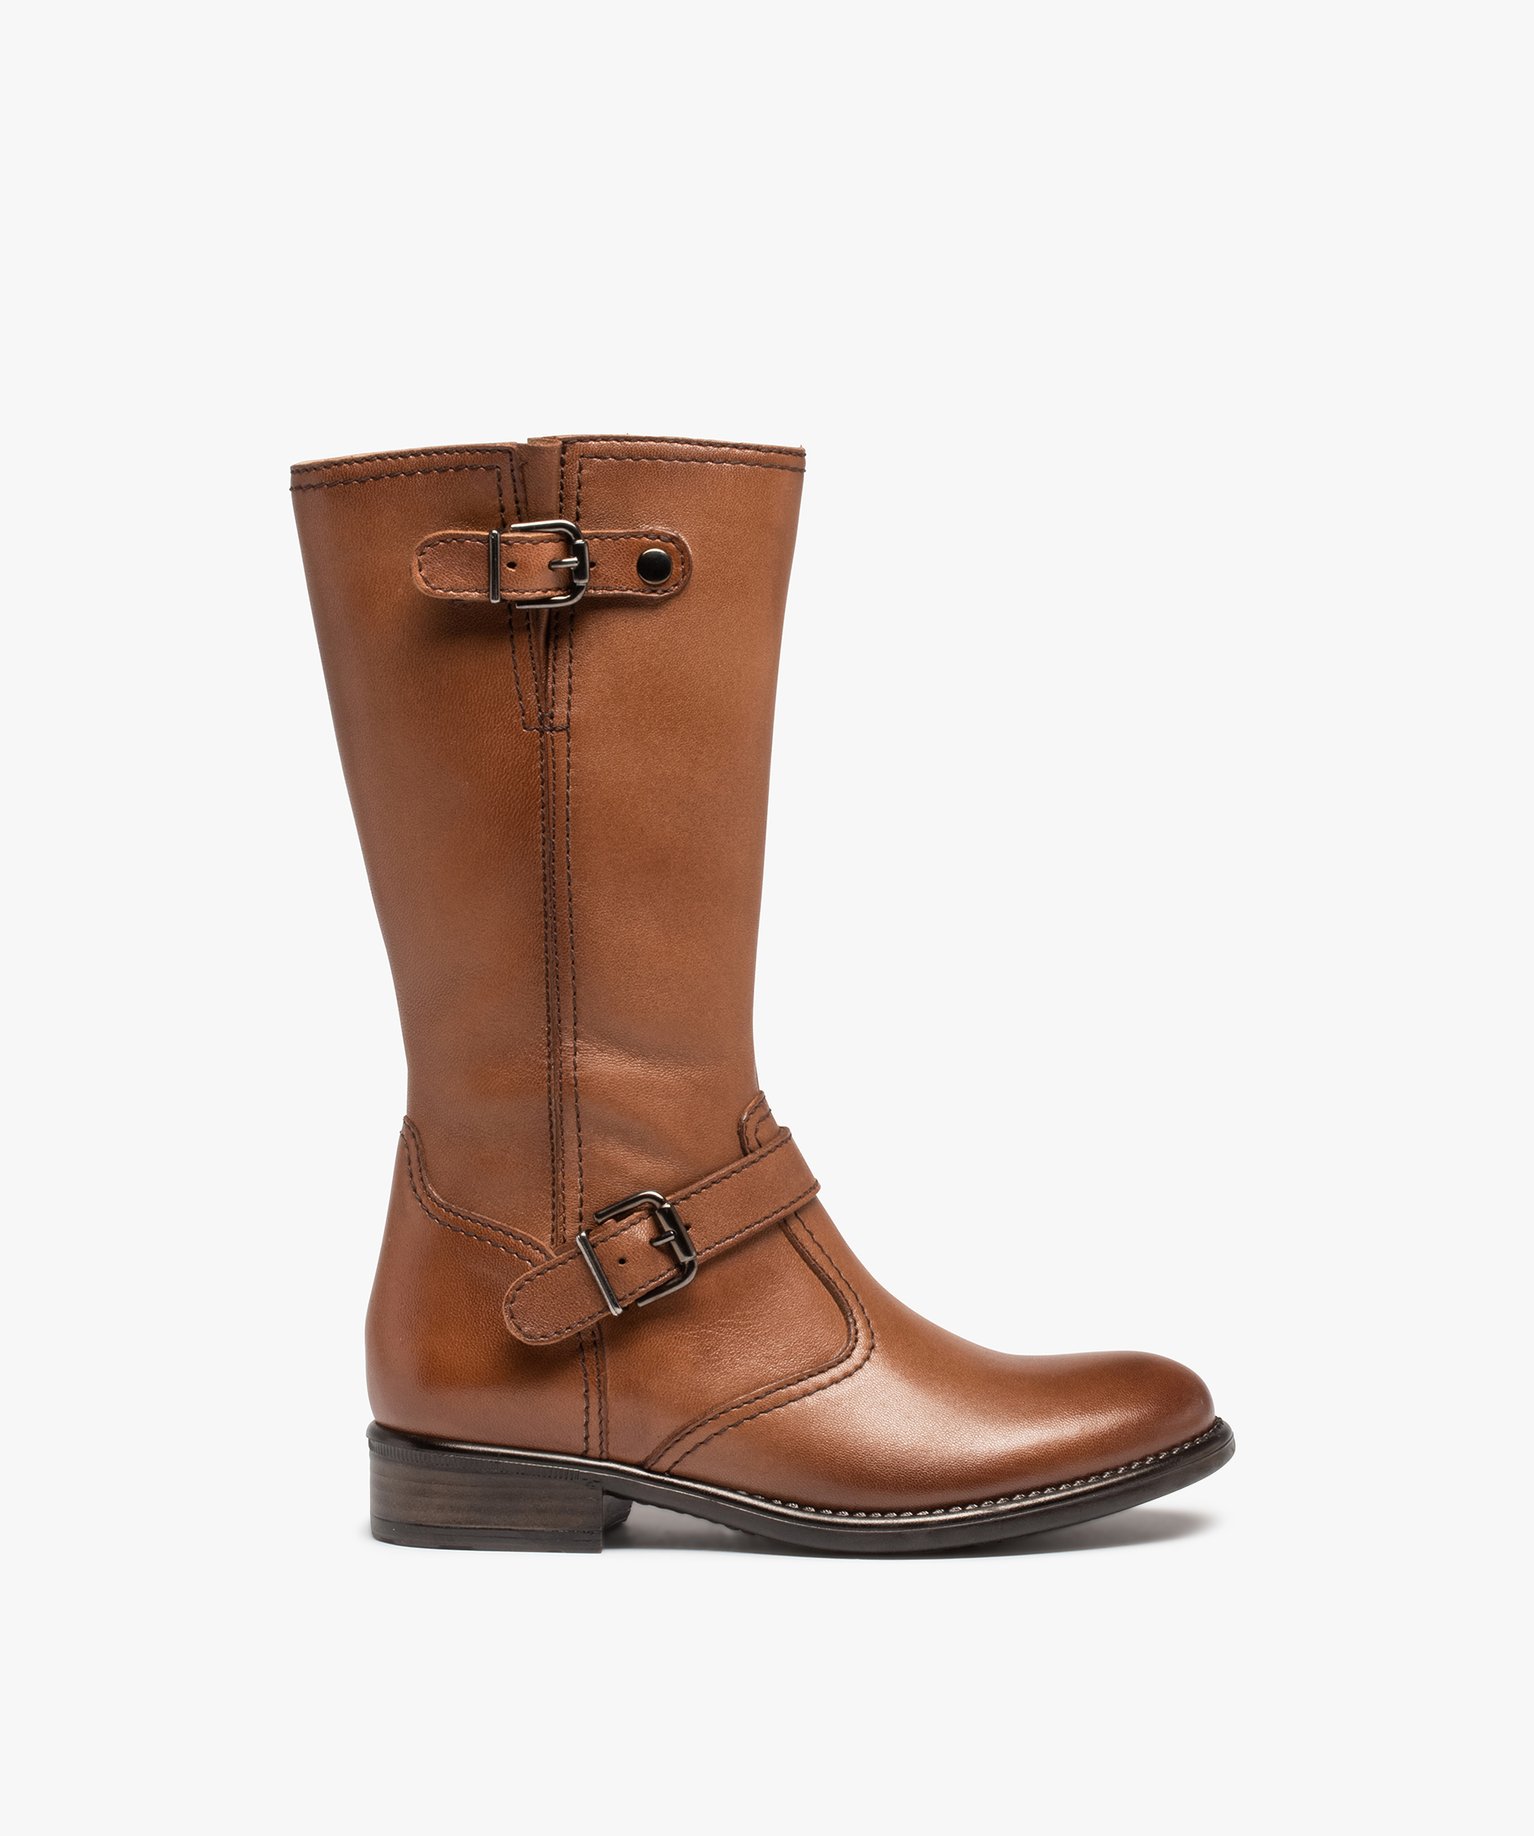 bottes fille cavalieres unies dessus cuir - taneo brun